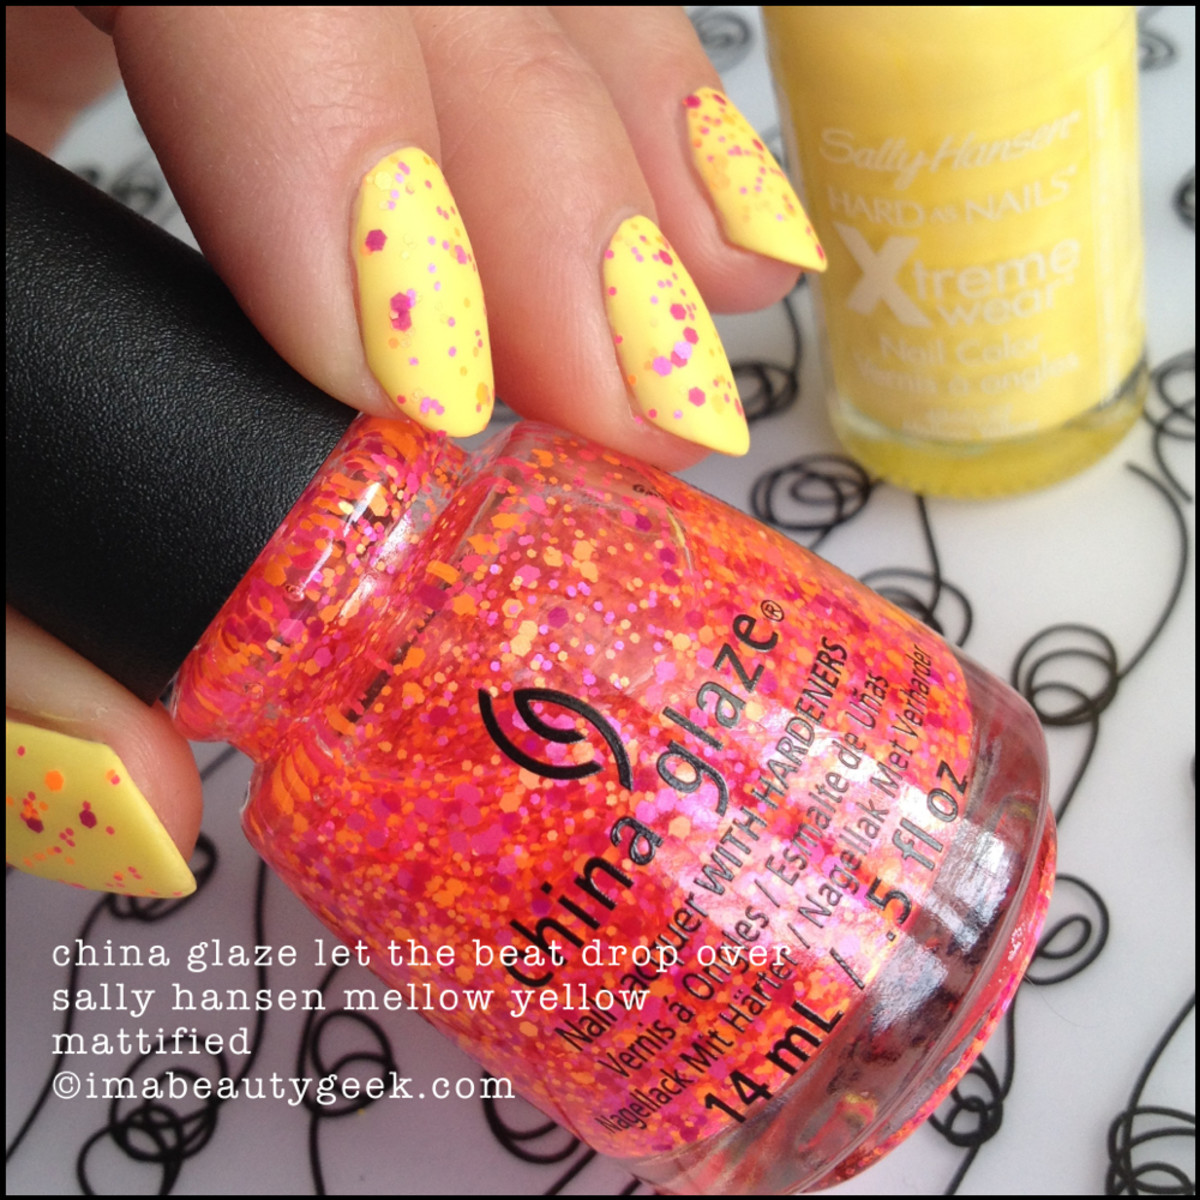 China Glaze Let The Beat Drop over Mellow Yellow